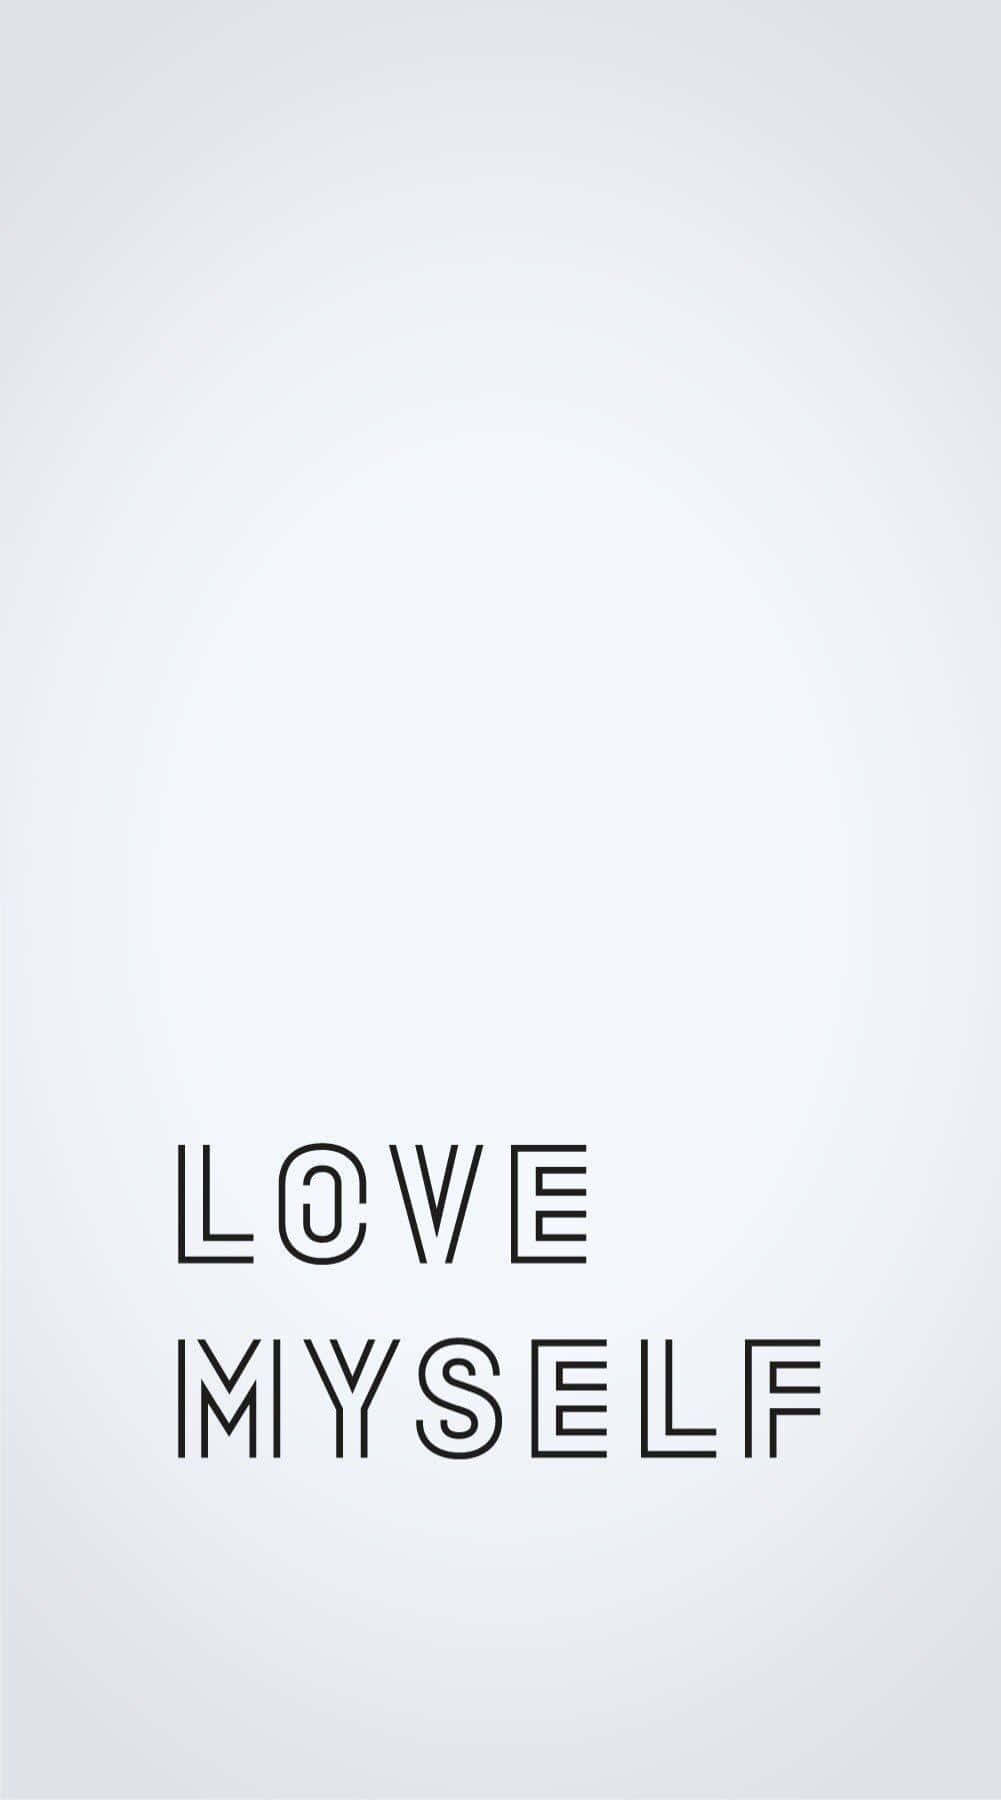 Love Yourself And The World Around You - Be Kind And Compassionate! Background